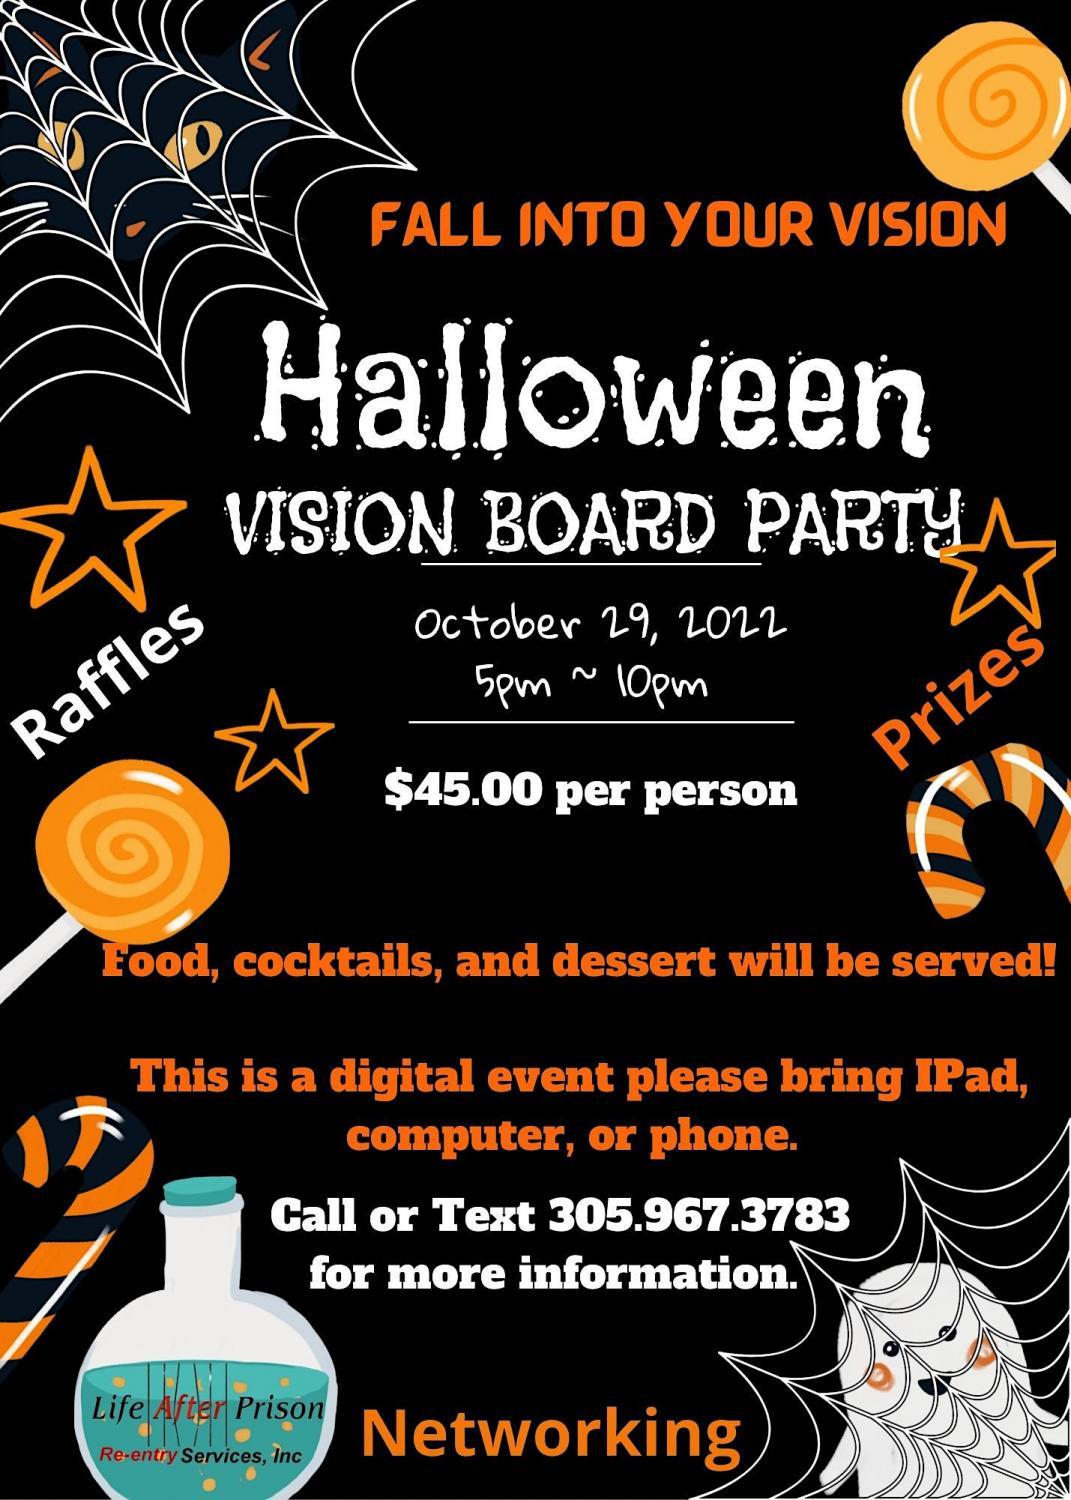 Fall into your VISION Halloween Party
Sat Oct 29, 7:00 PM - Sat Oct 29, 7:00 PM
in 10 days